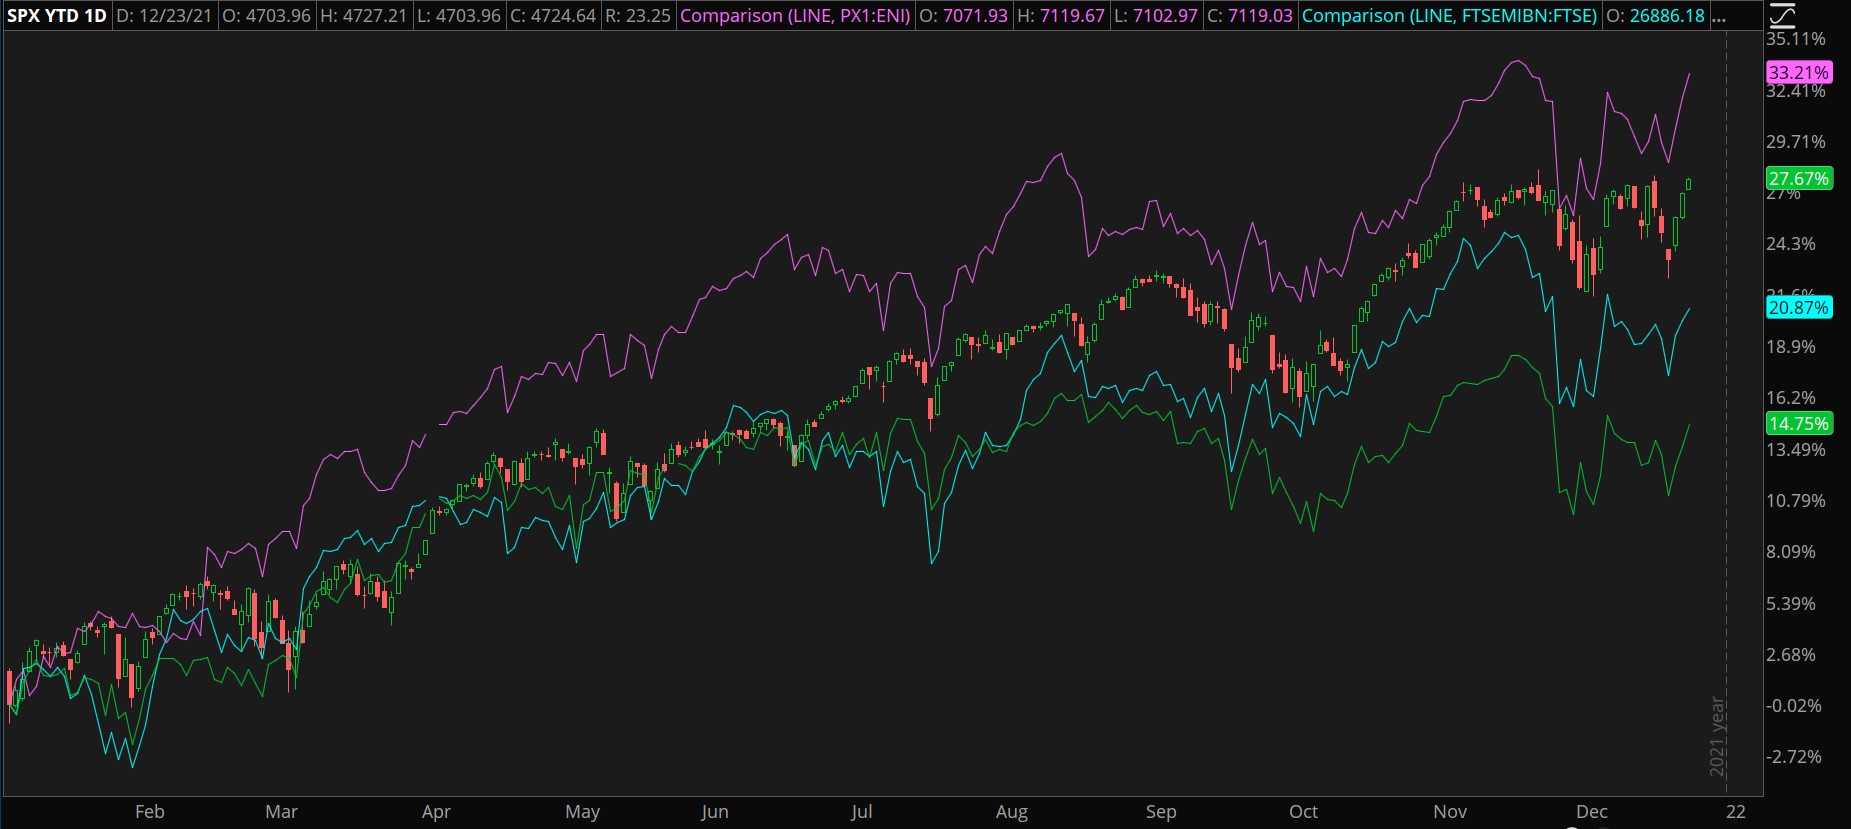 CAC 40, SPX, FTSE 100 And DAX Combined Chart.